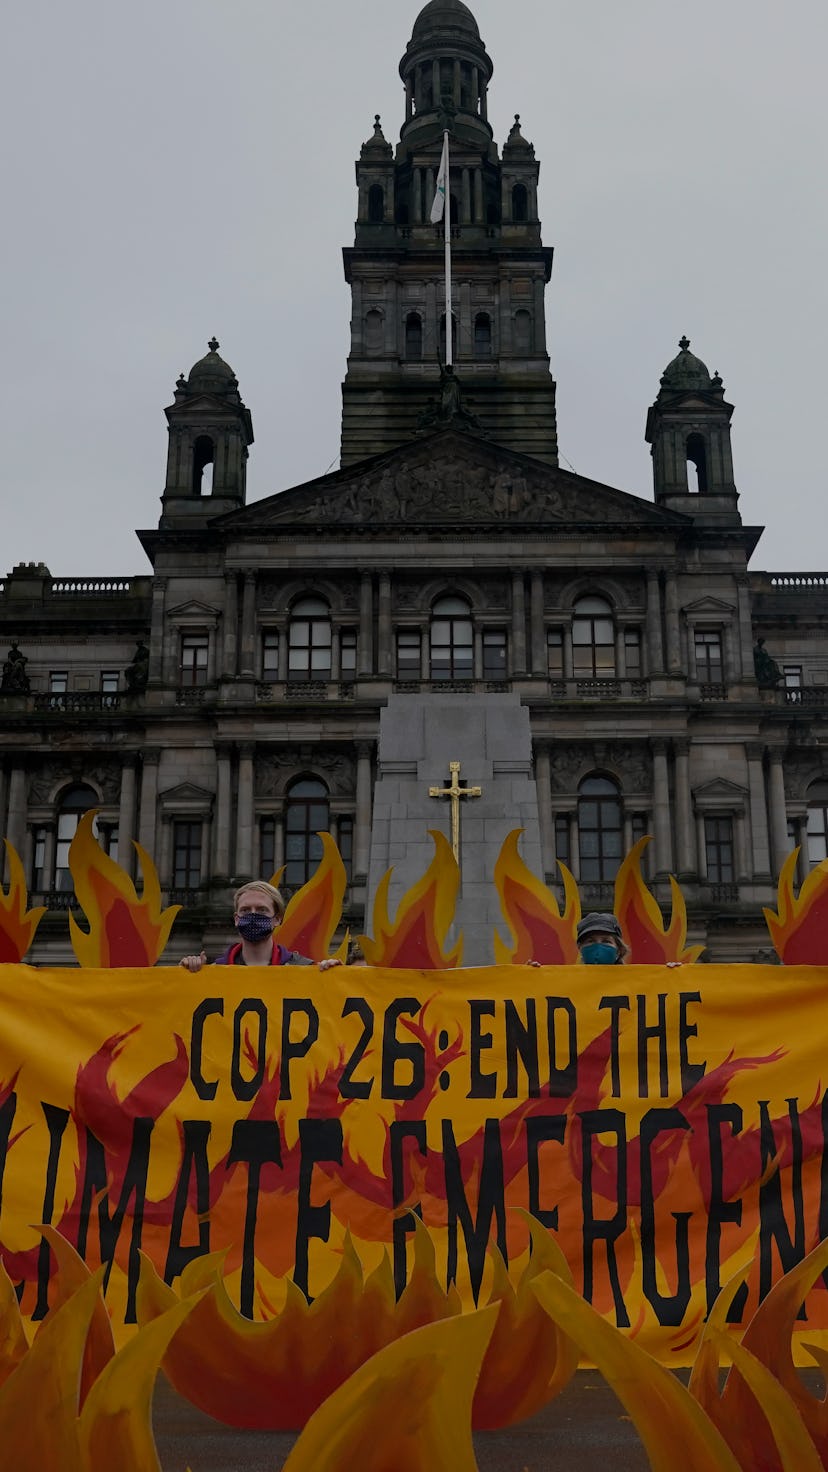 Climate activists "set fire" to George Square, Glasgow, with an art installation of faux flames, smo...